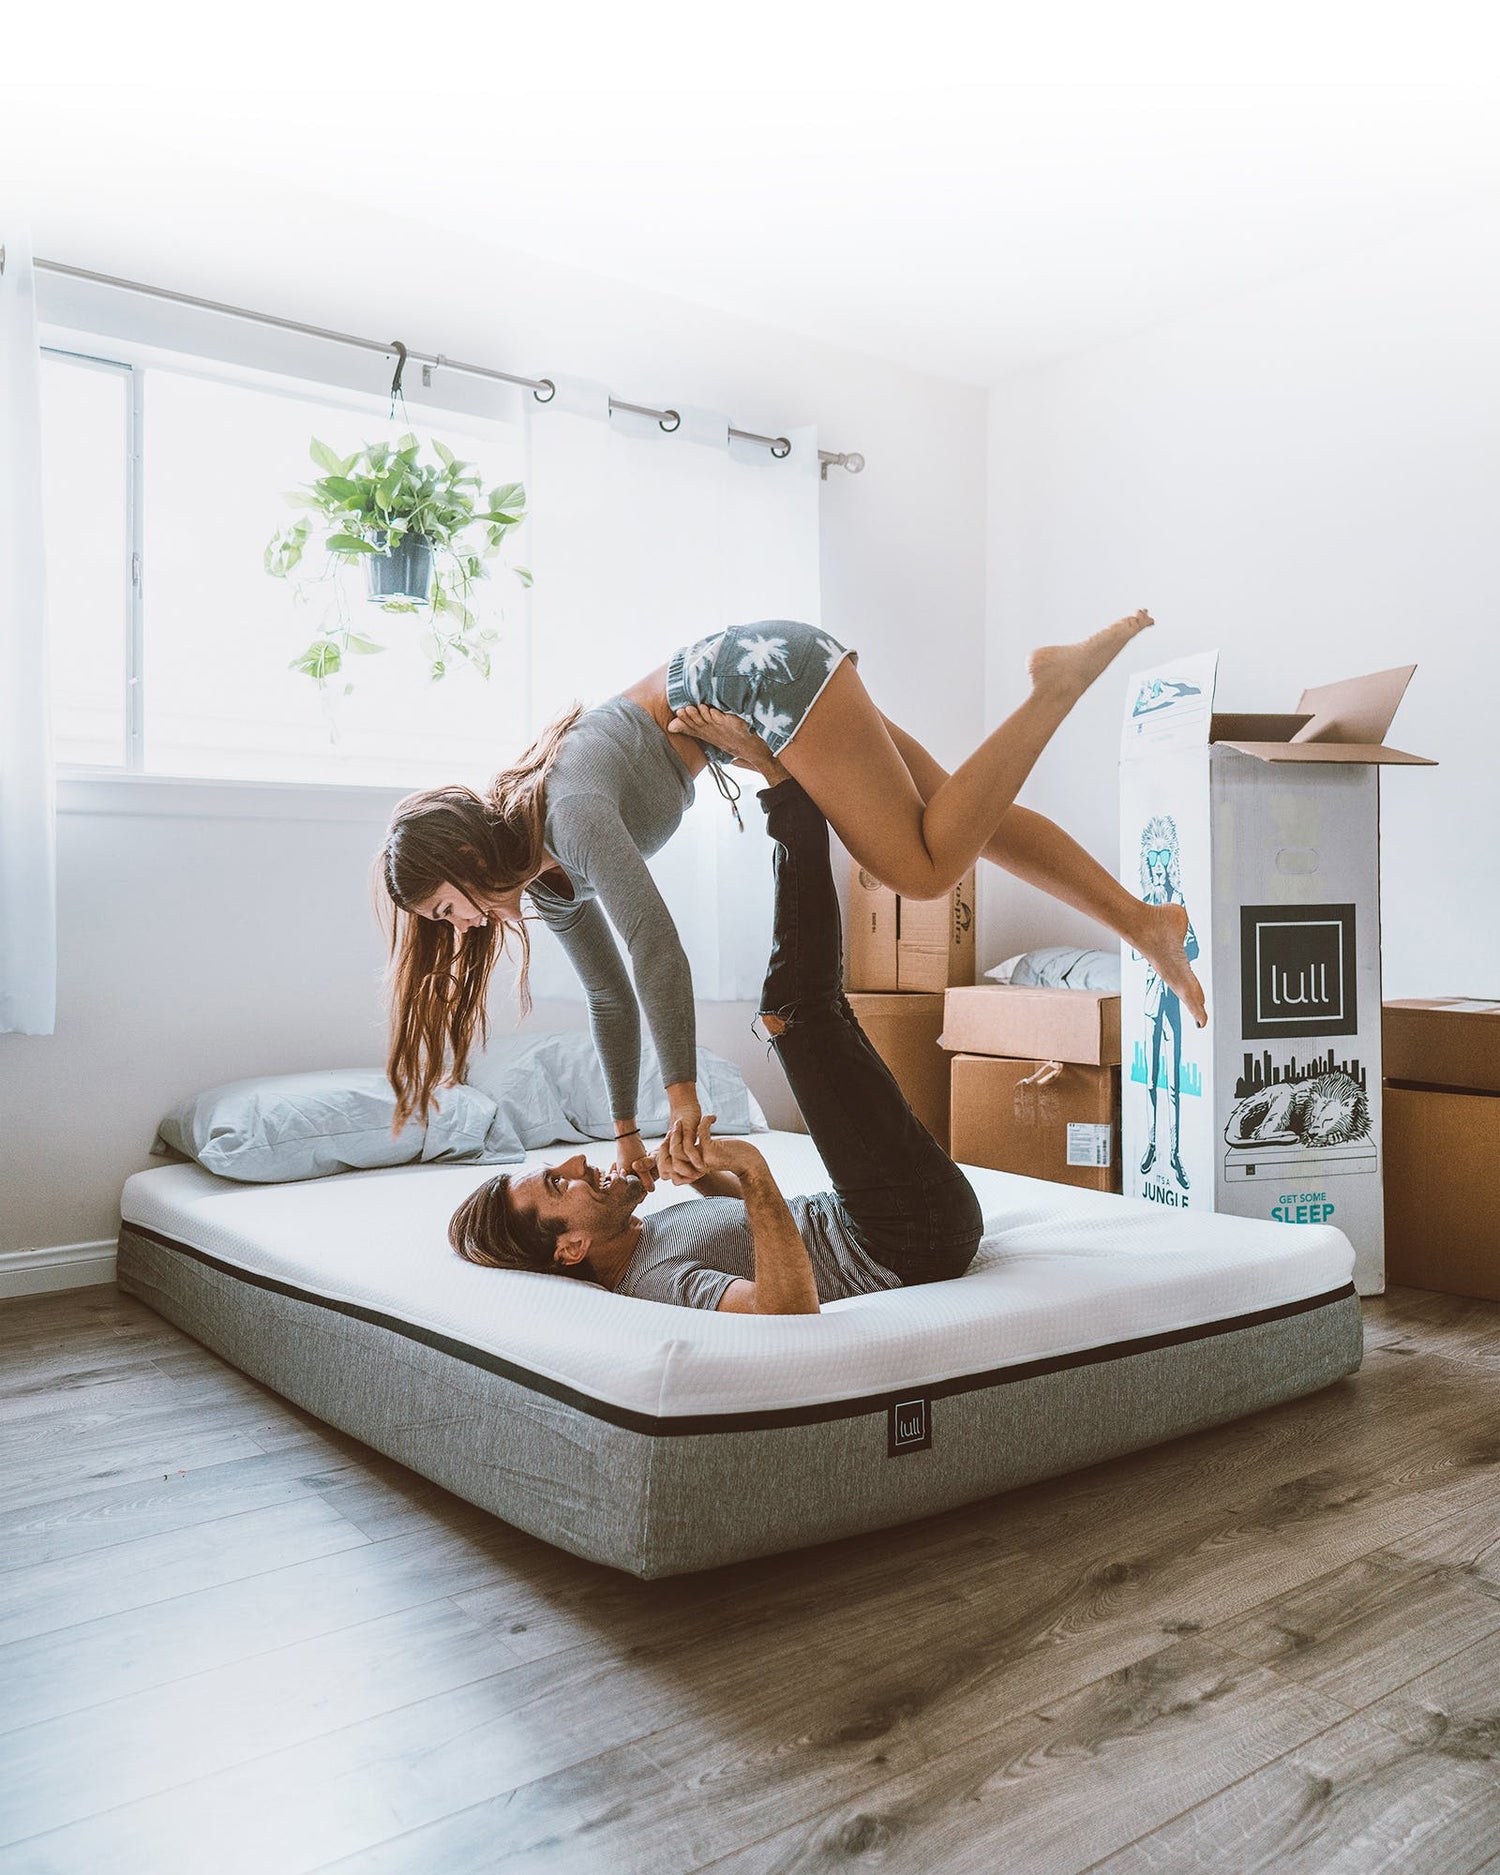 A happy couple doing a yoga pose while on top of a lull mattress.